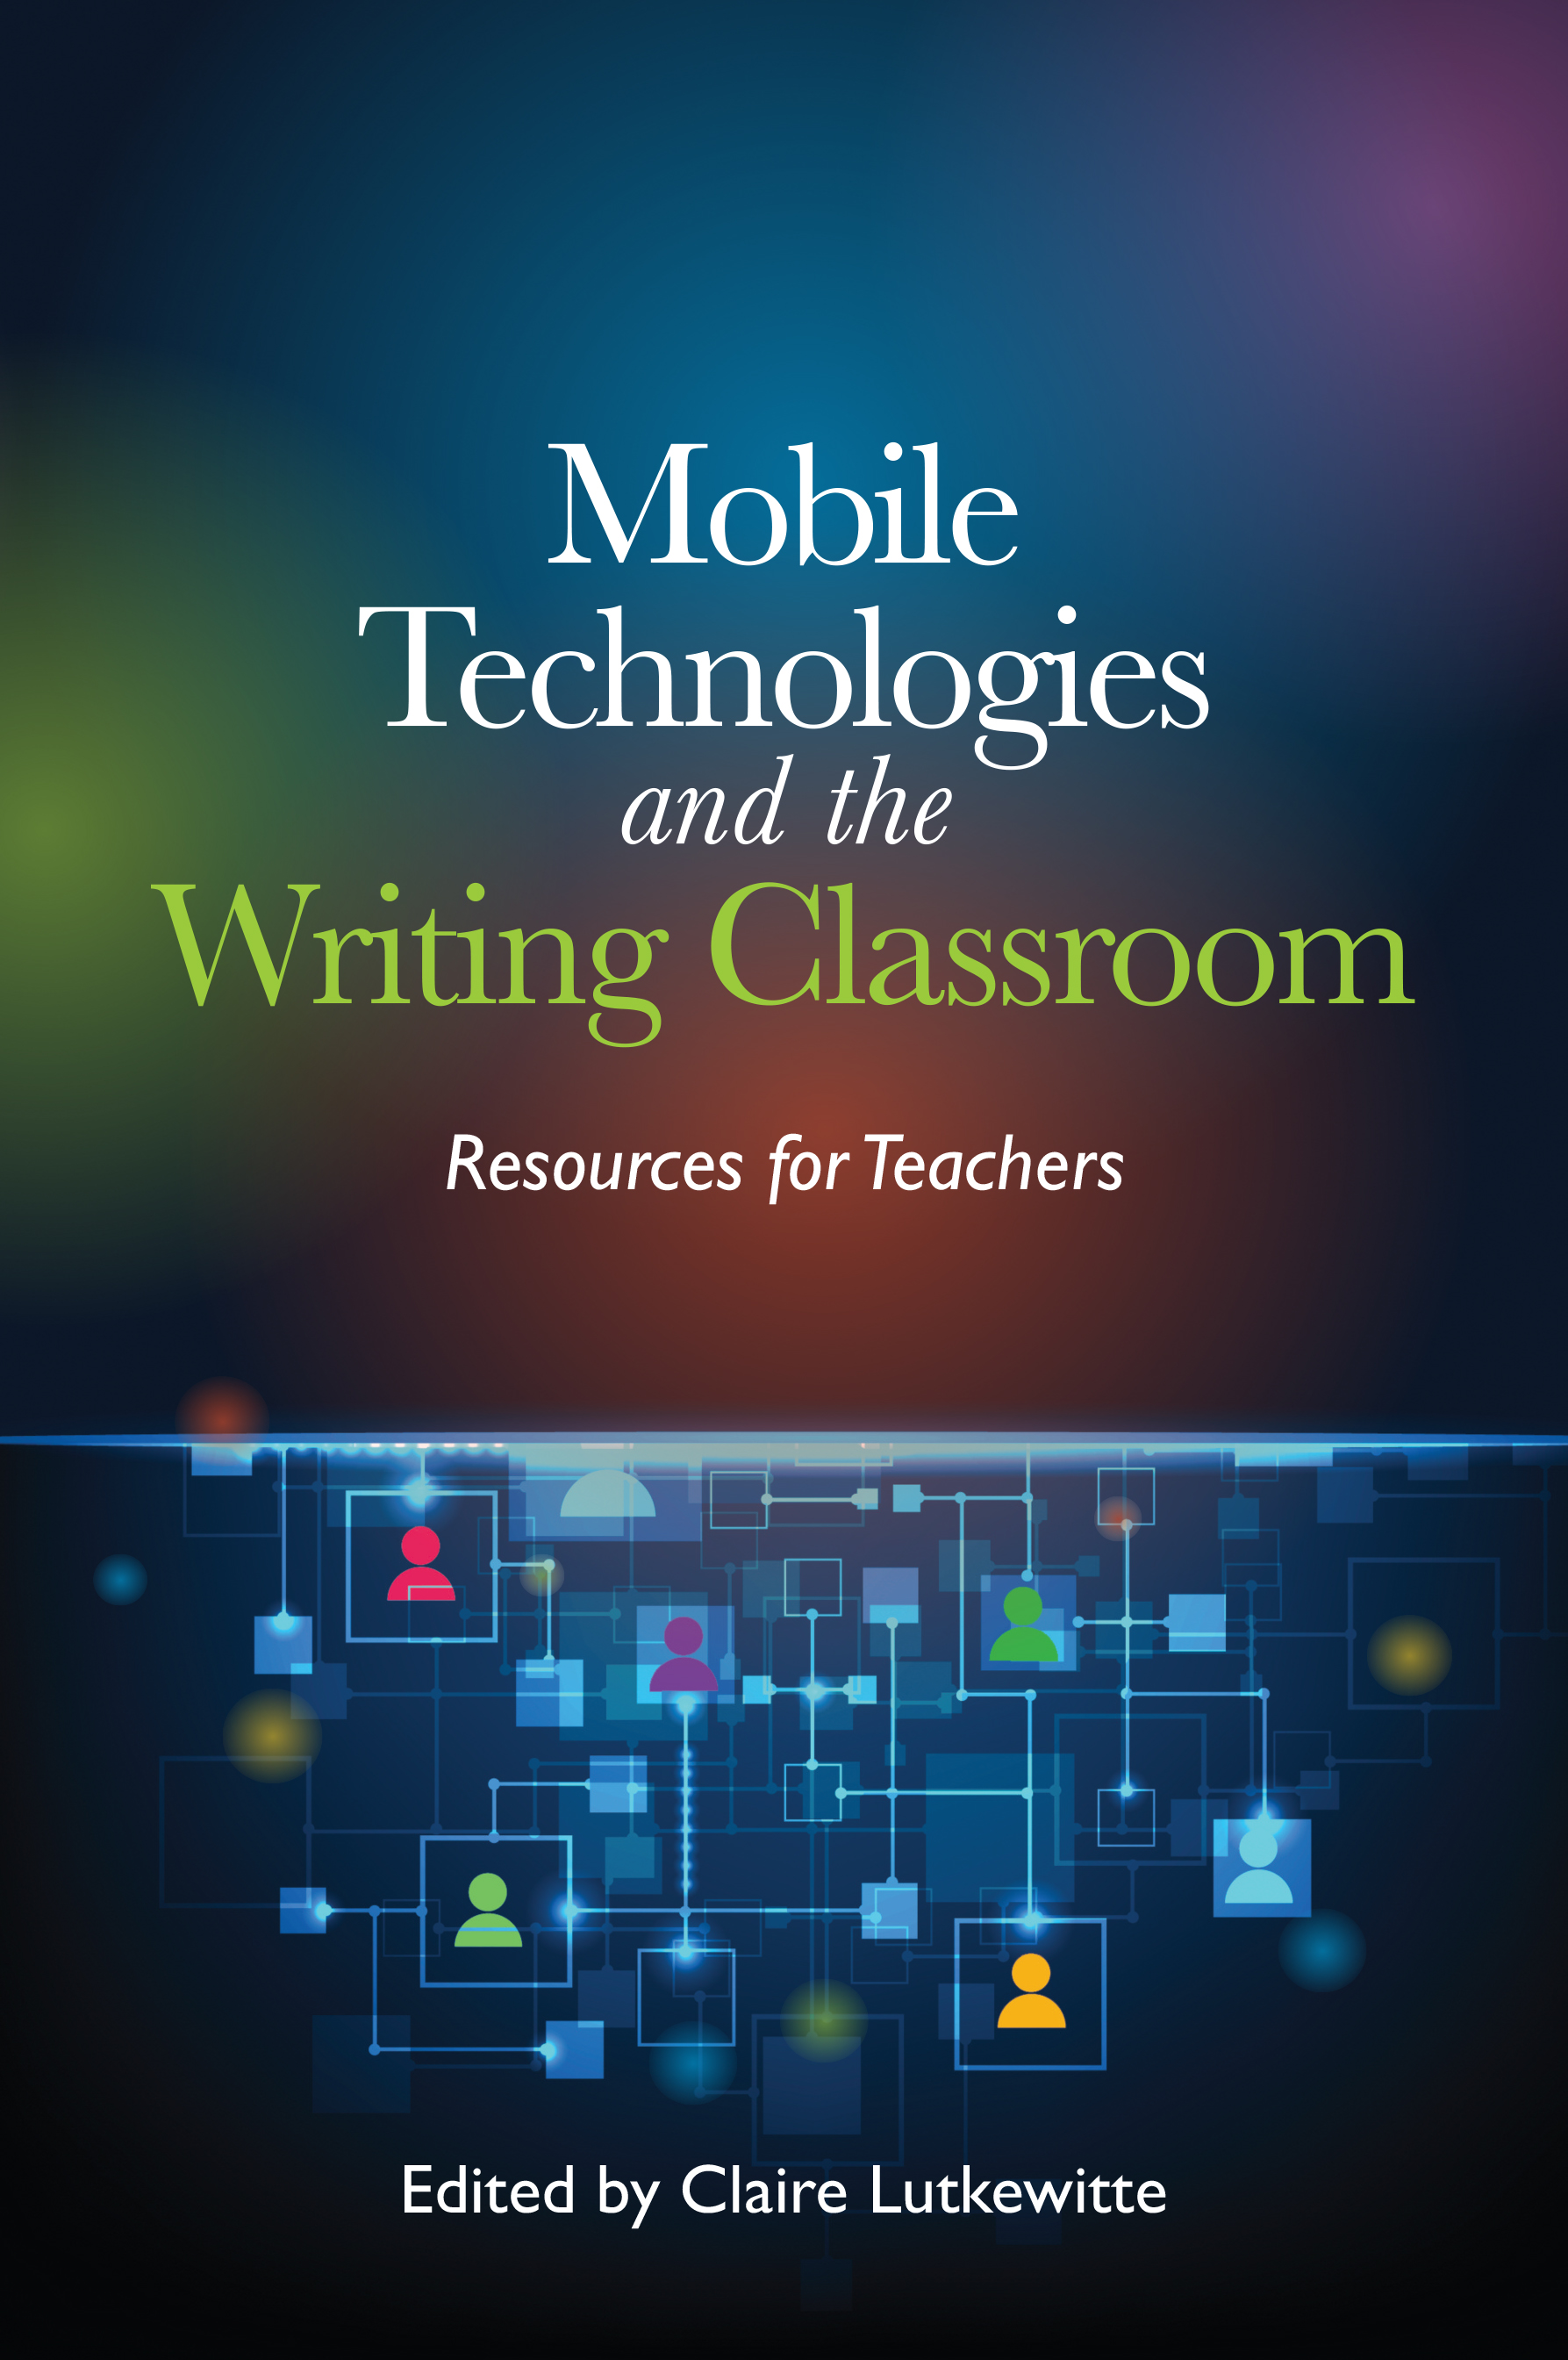 image of Mobile Technologies and the Writing Classroom